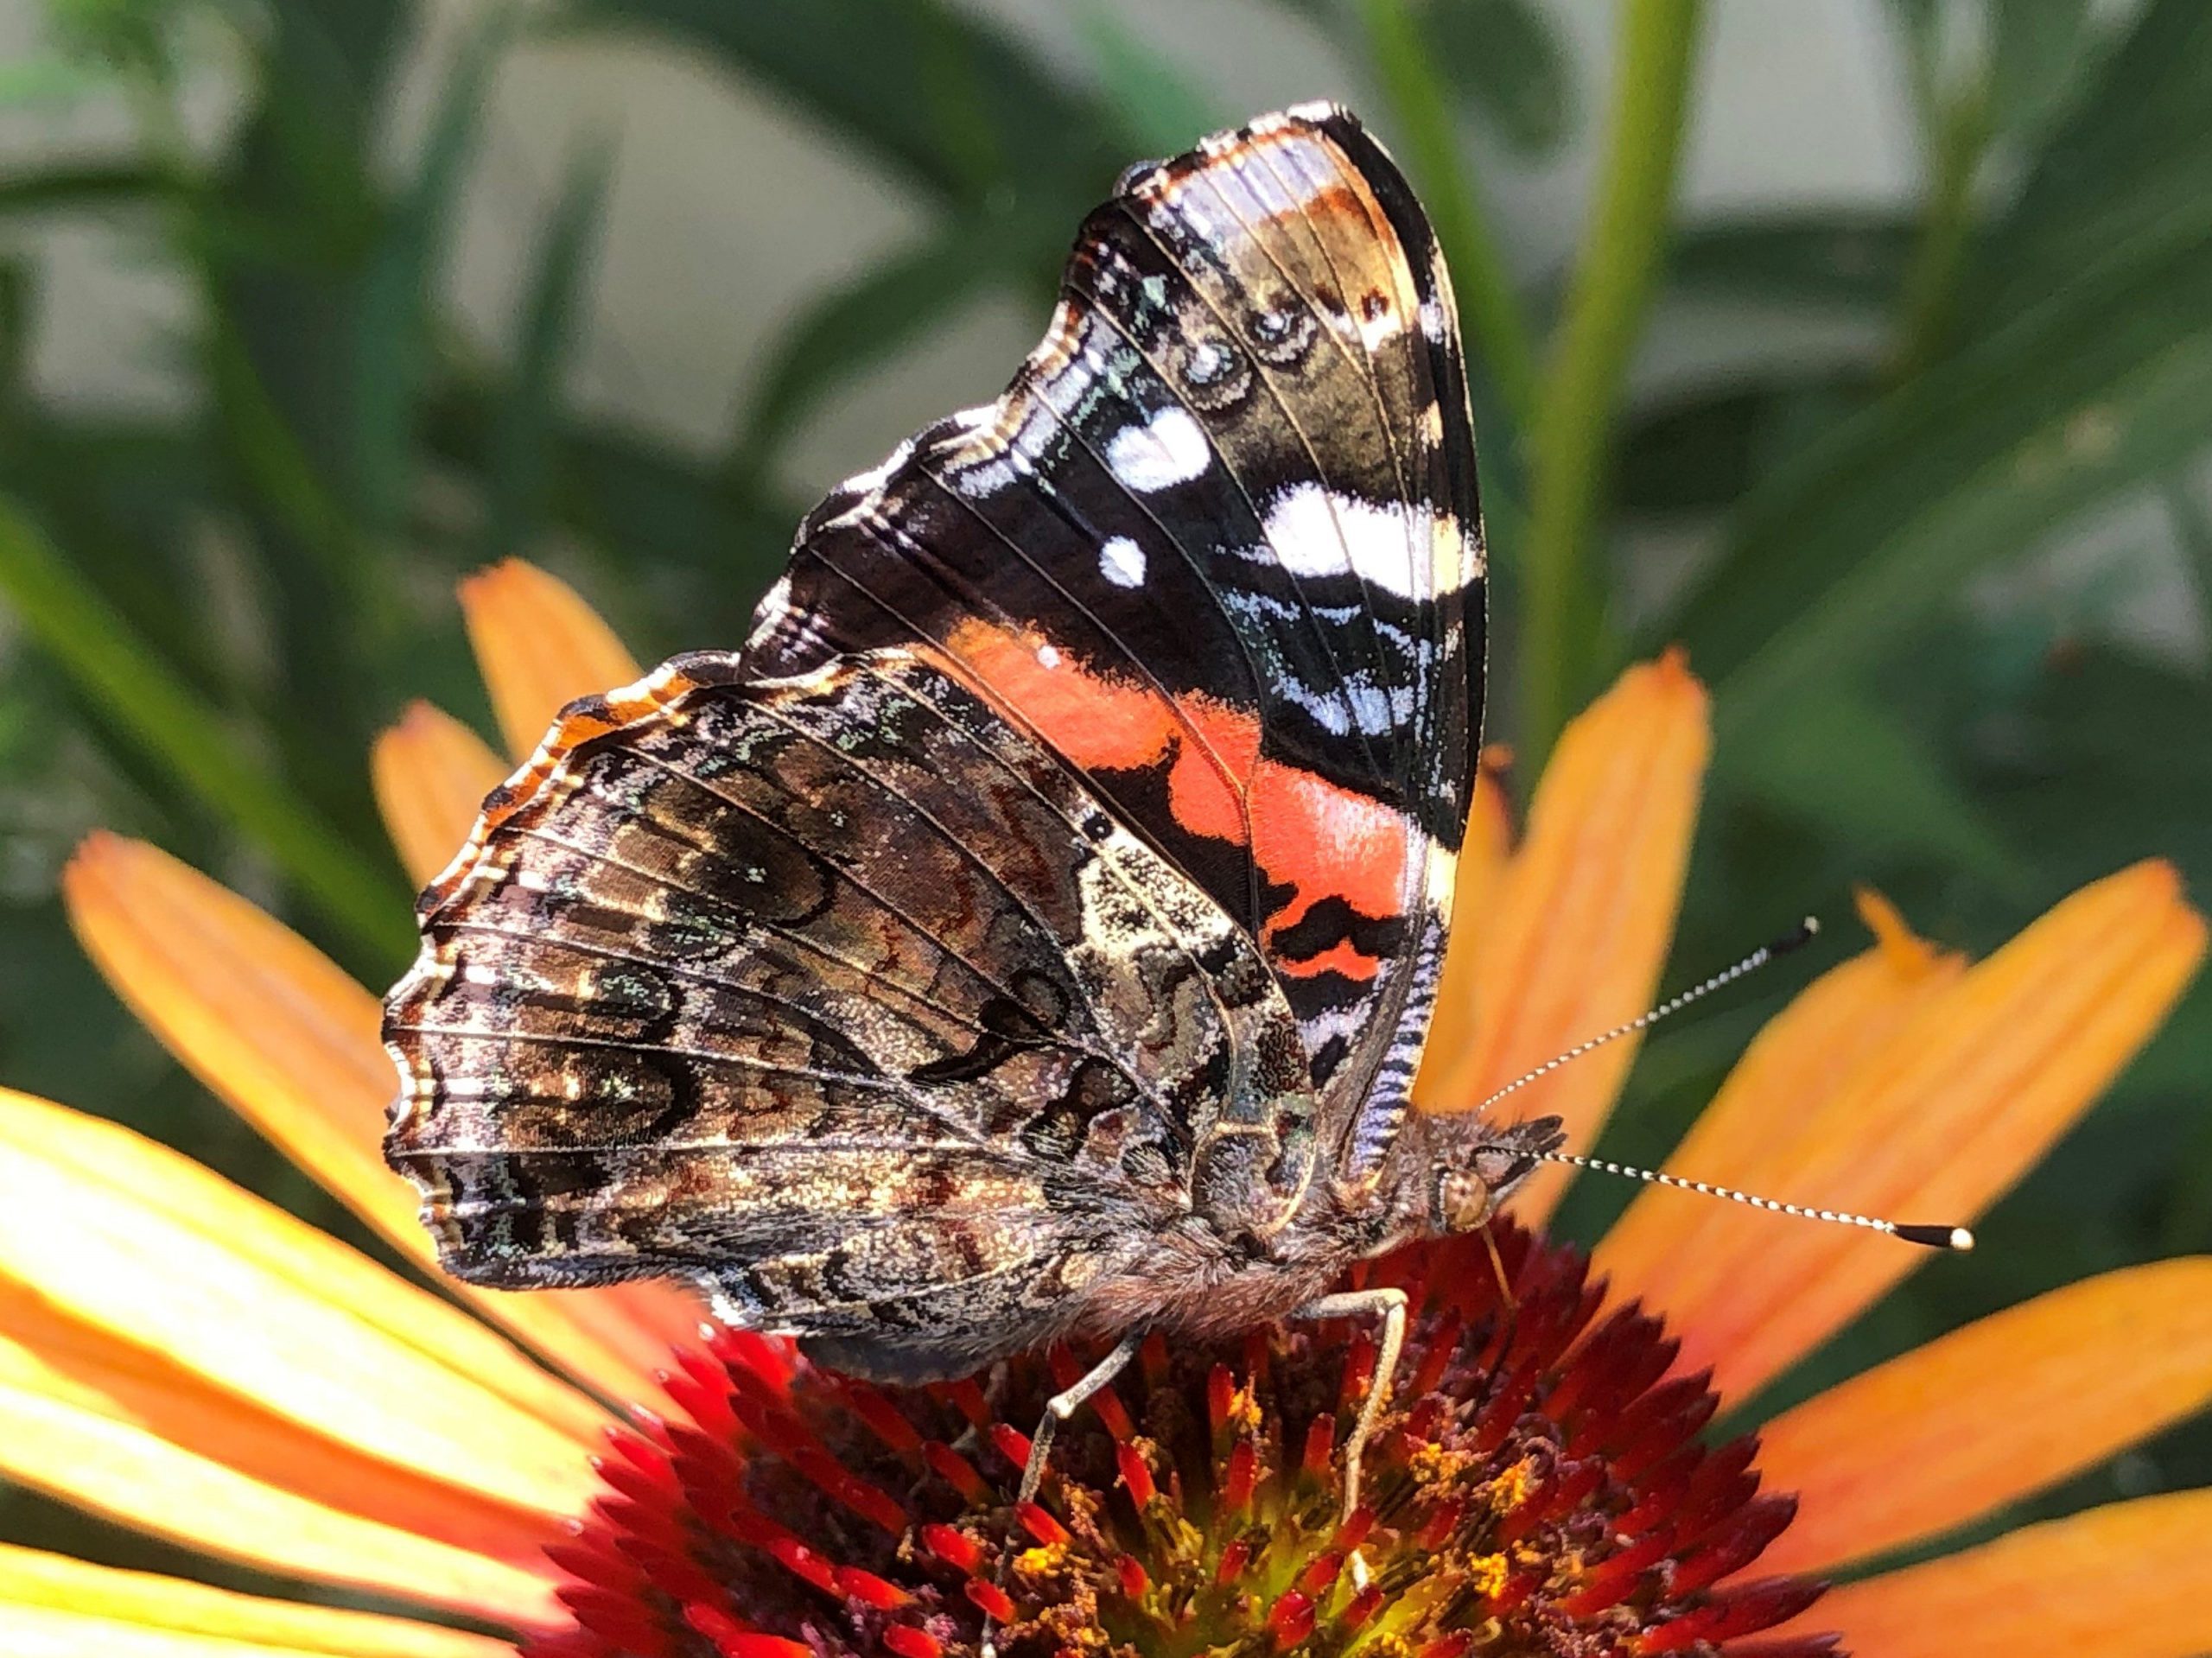 Red Admiral butterfly with closed wings on coneflower by Suzanne Herel